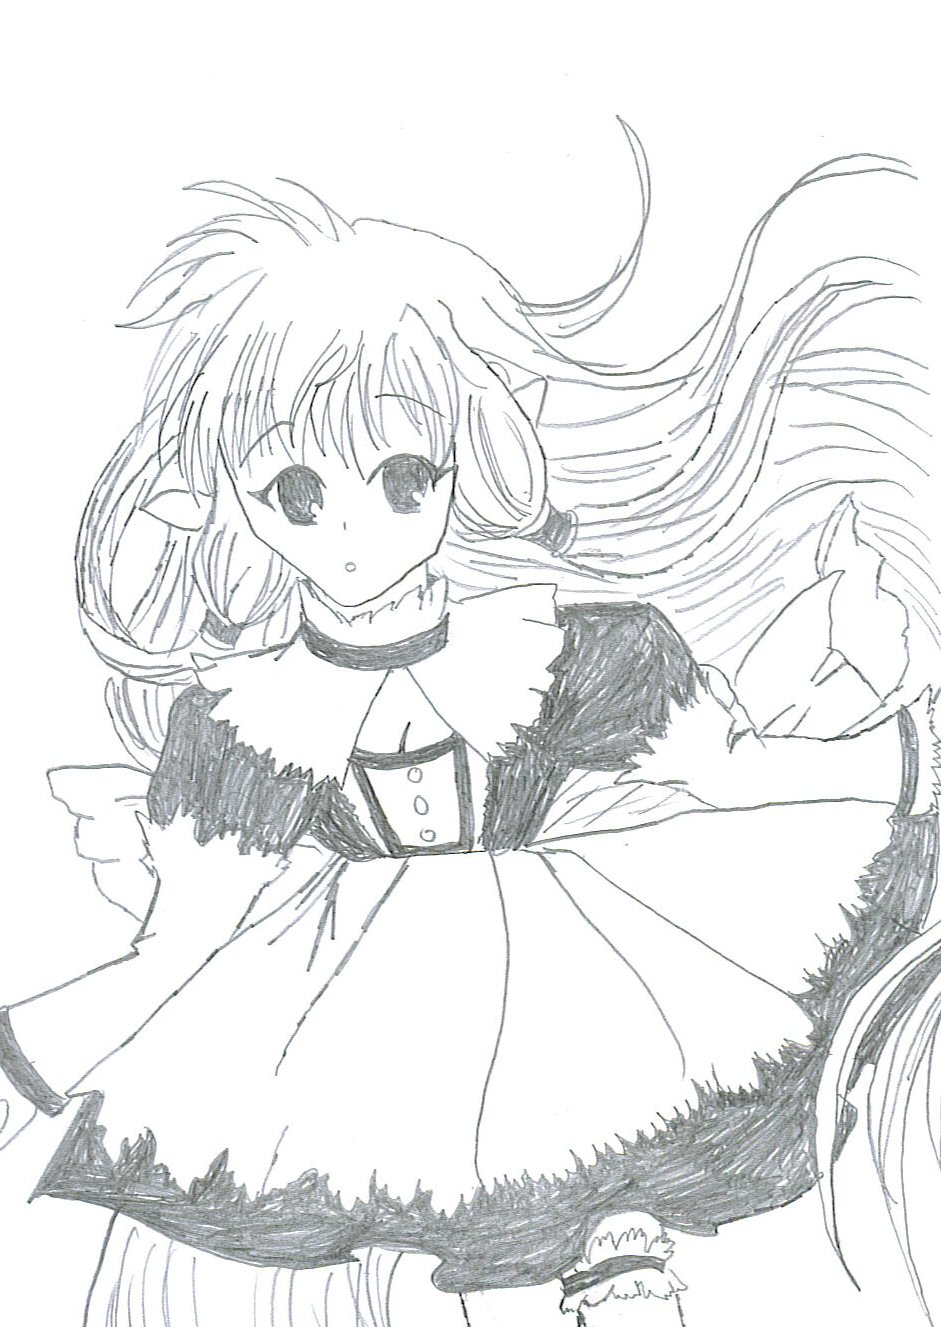 Chii in a Maids Outfit by KionaKina